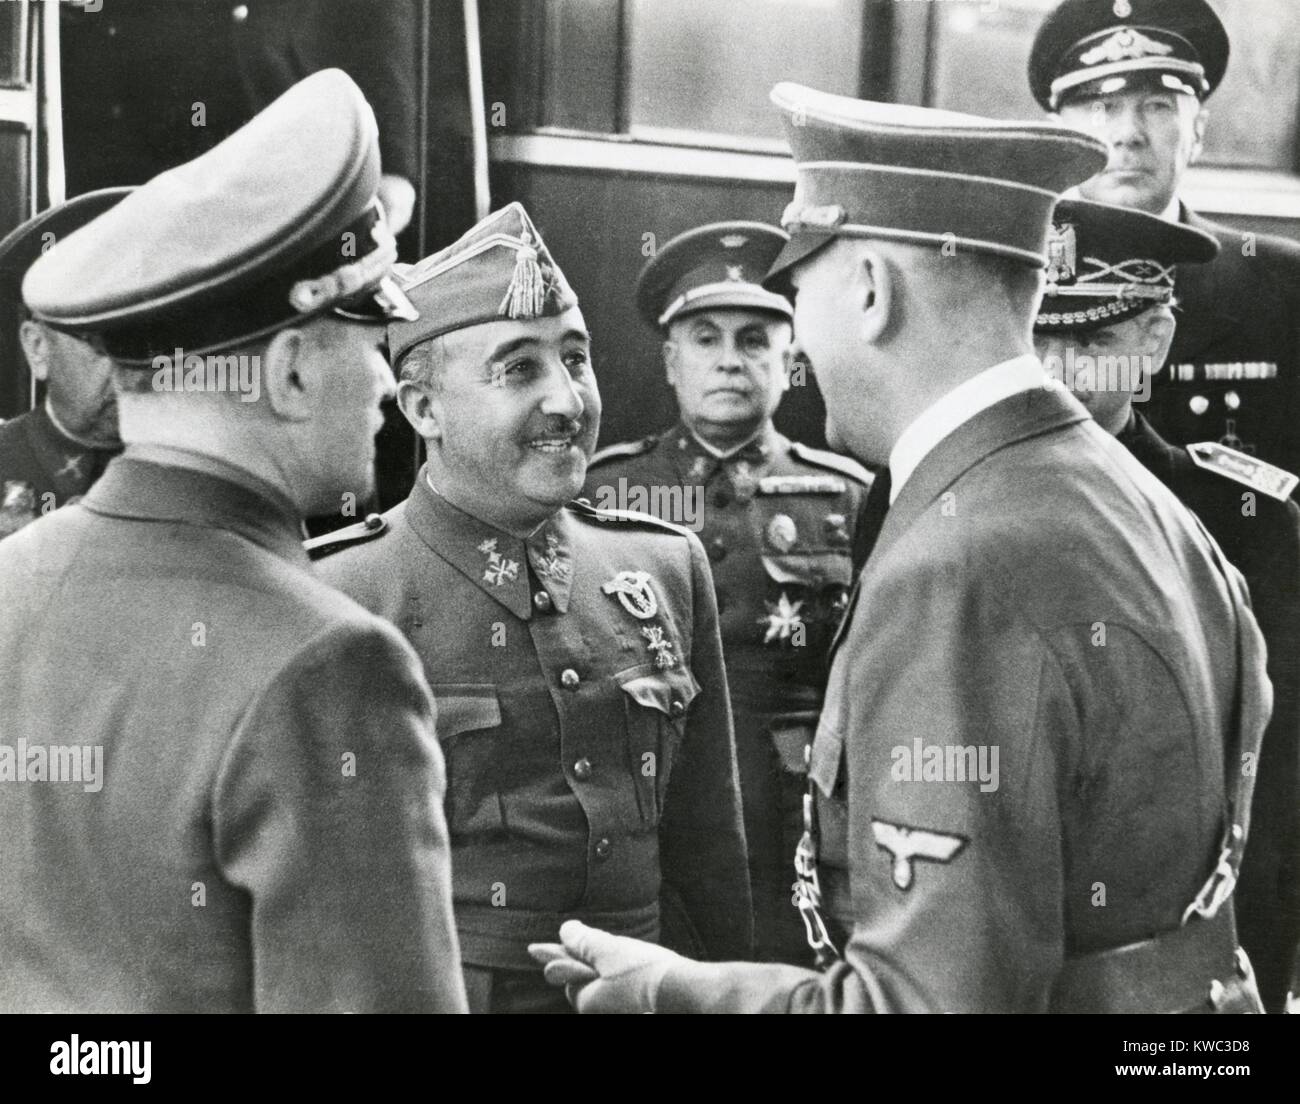 Spanish Fascist dictator Francisco Franco and Adolf Hitler meet for the first time, Oct. 23, 1940. In their 9 hour conference, Hitler urged Franco join him in World War 2 conflict. Franco countered that his country needed food, weapons, and gasoline before he could enter the war. Spain remained neutral throughout WW2. (BSLOC 2015 13 55) Stock Photo